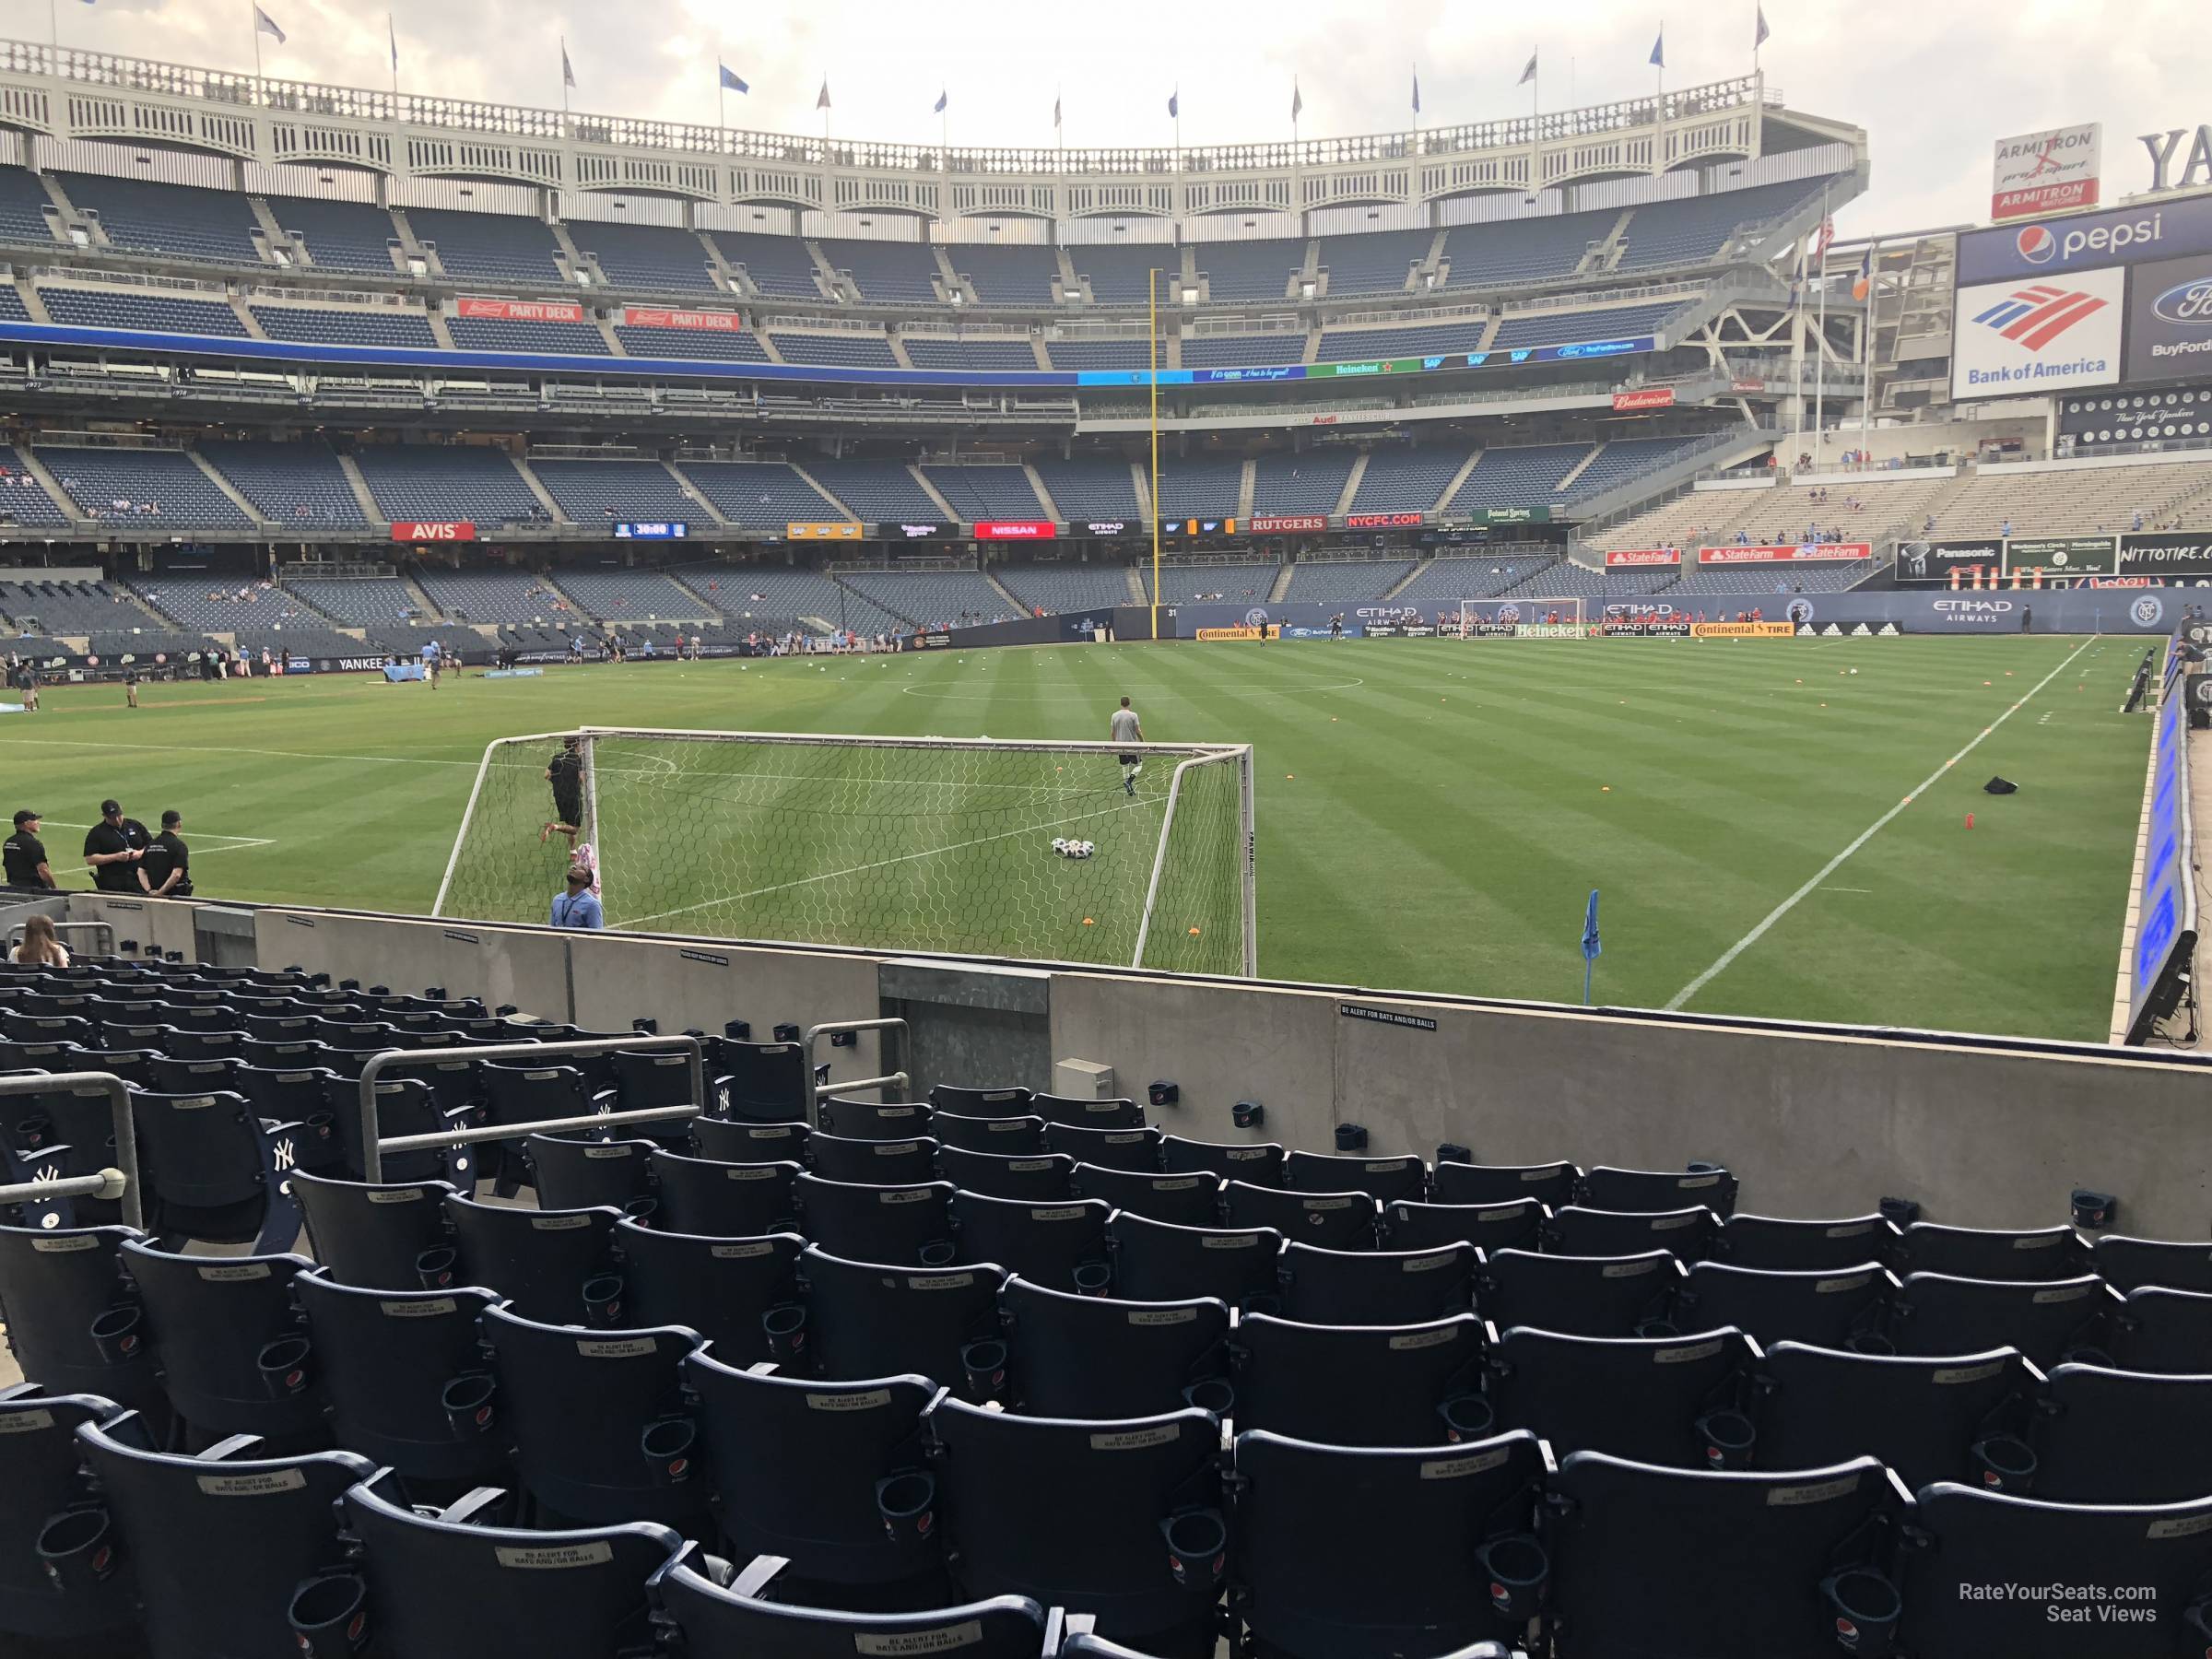 section 109, row 10 seat view  for soccer - yankee stadium